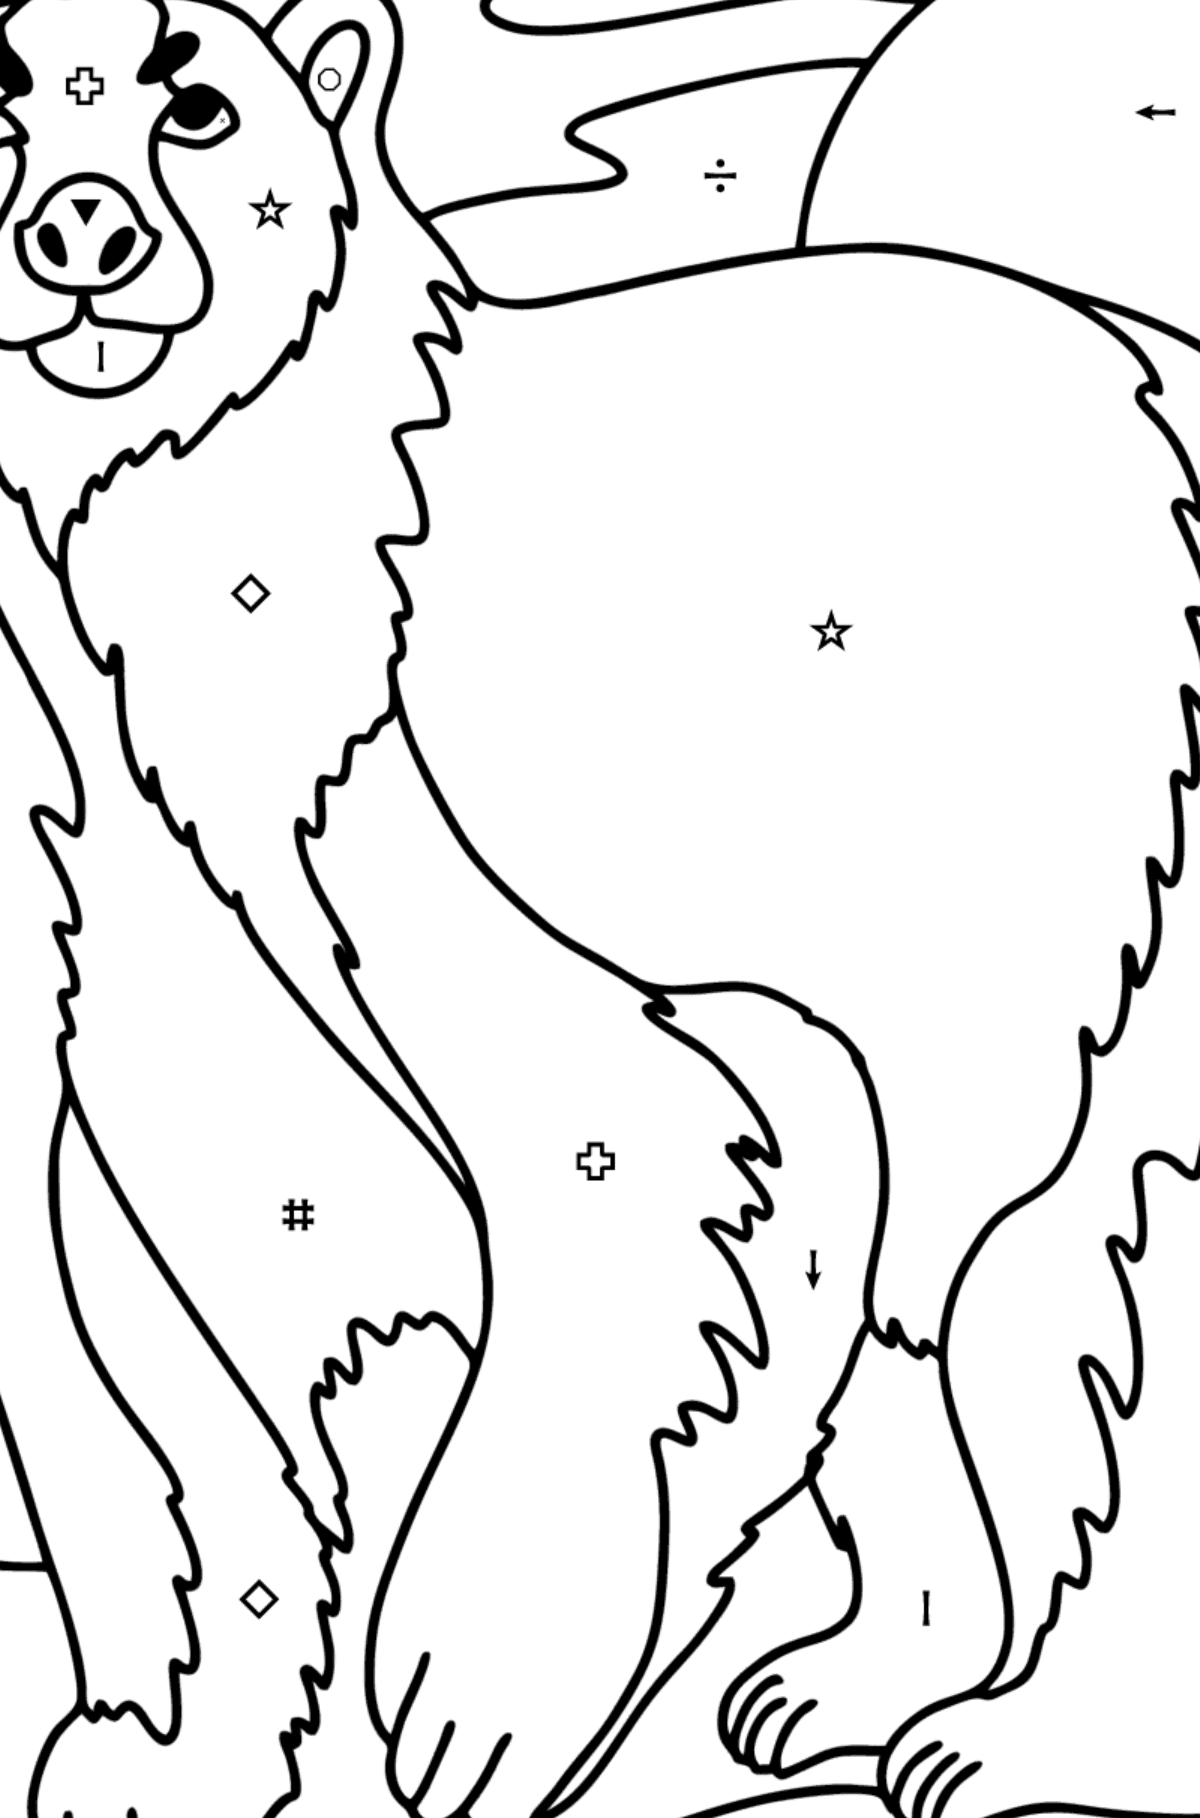 Polar bear coloring page - Coloring by Symbols and Geometric Shapes for Kids